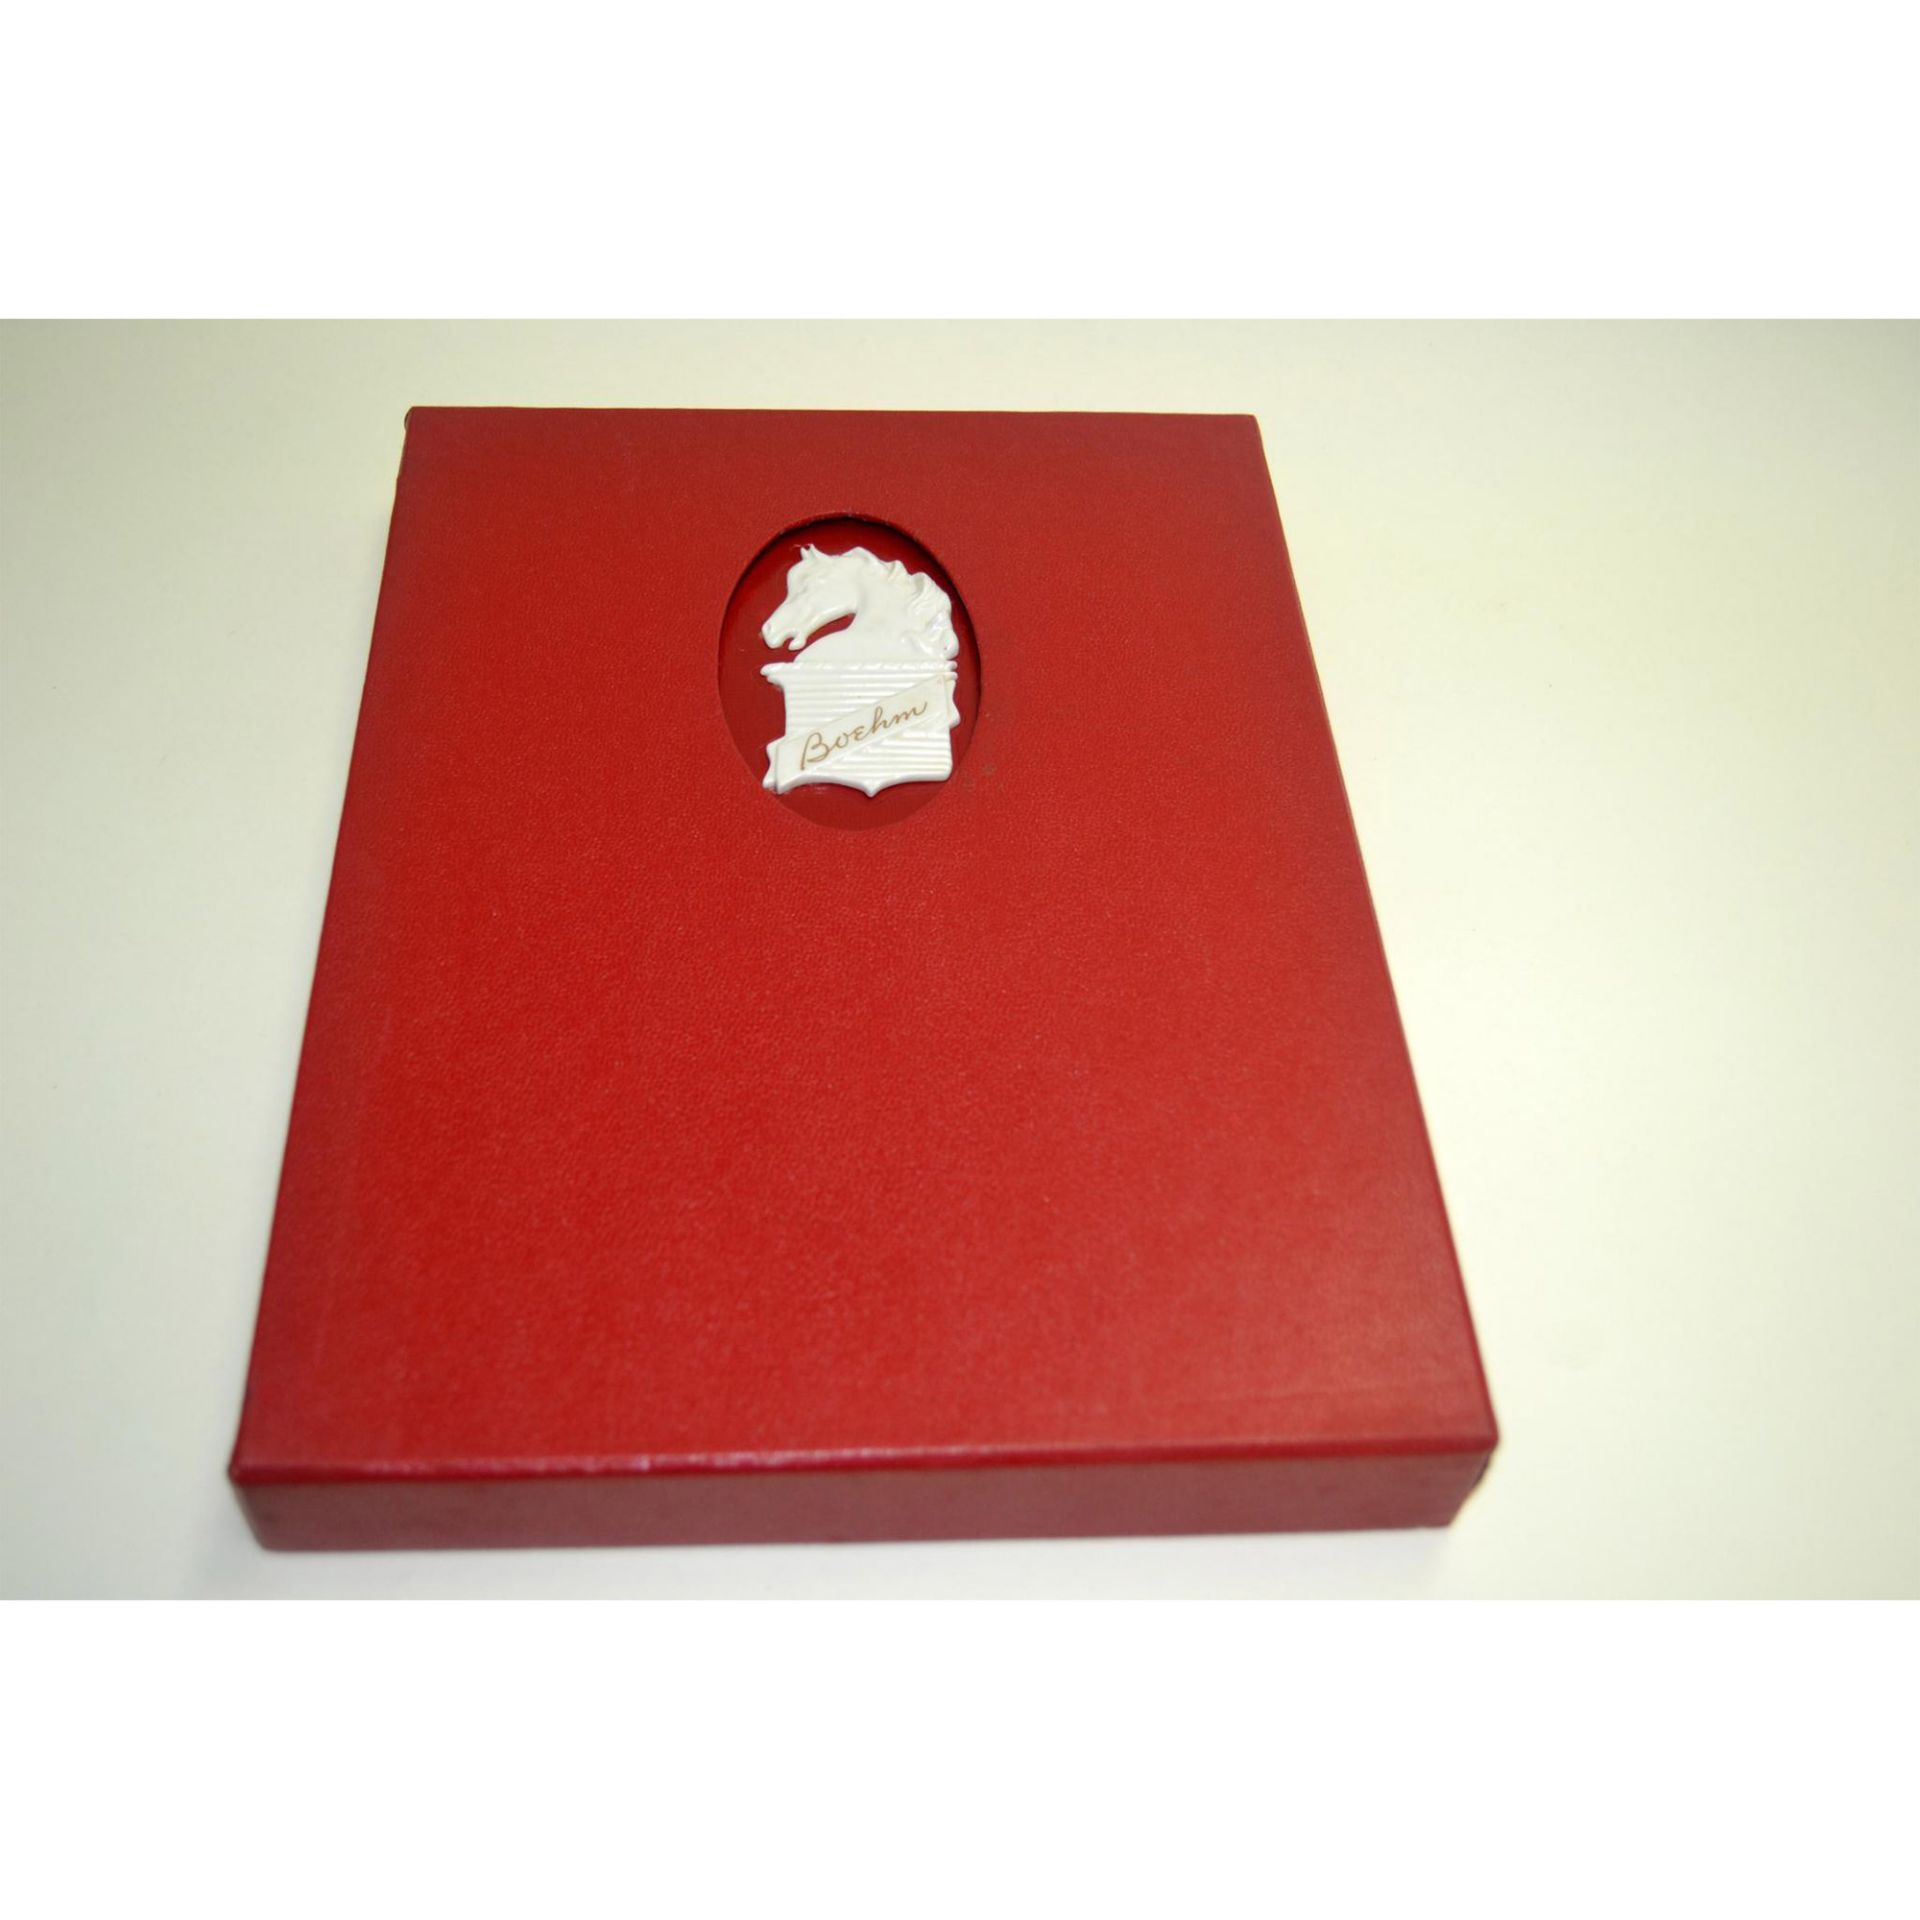 The Edward Marshall Boehm Leather Book With Sleeve, 1913-1969 Limited Edition, 1970 - Image 2 of 4